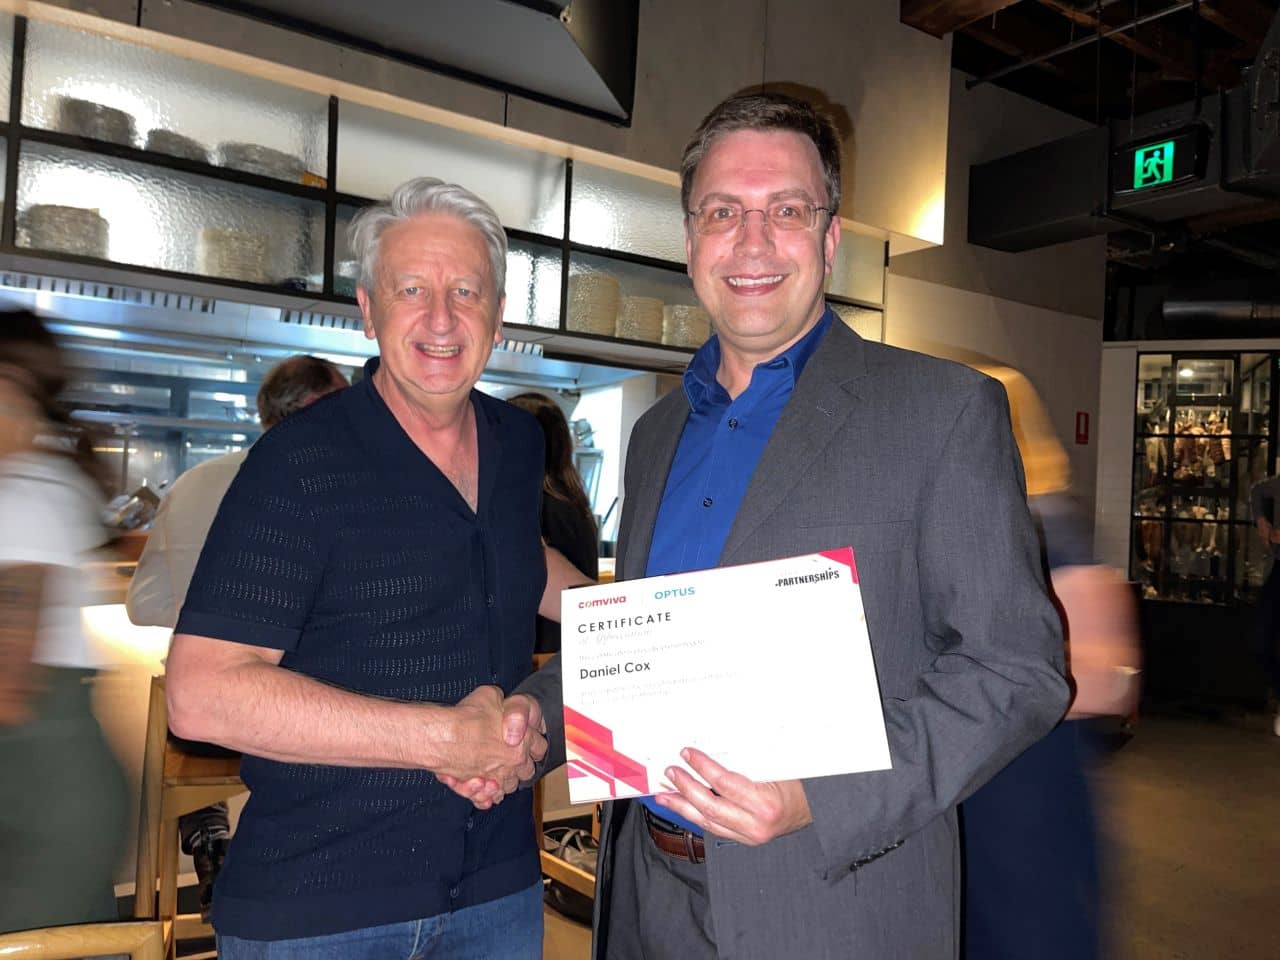 Daniel Cox holds award for Database Migration and Database security work for Comviva